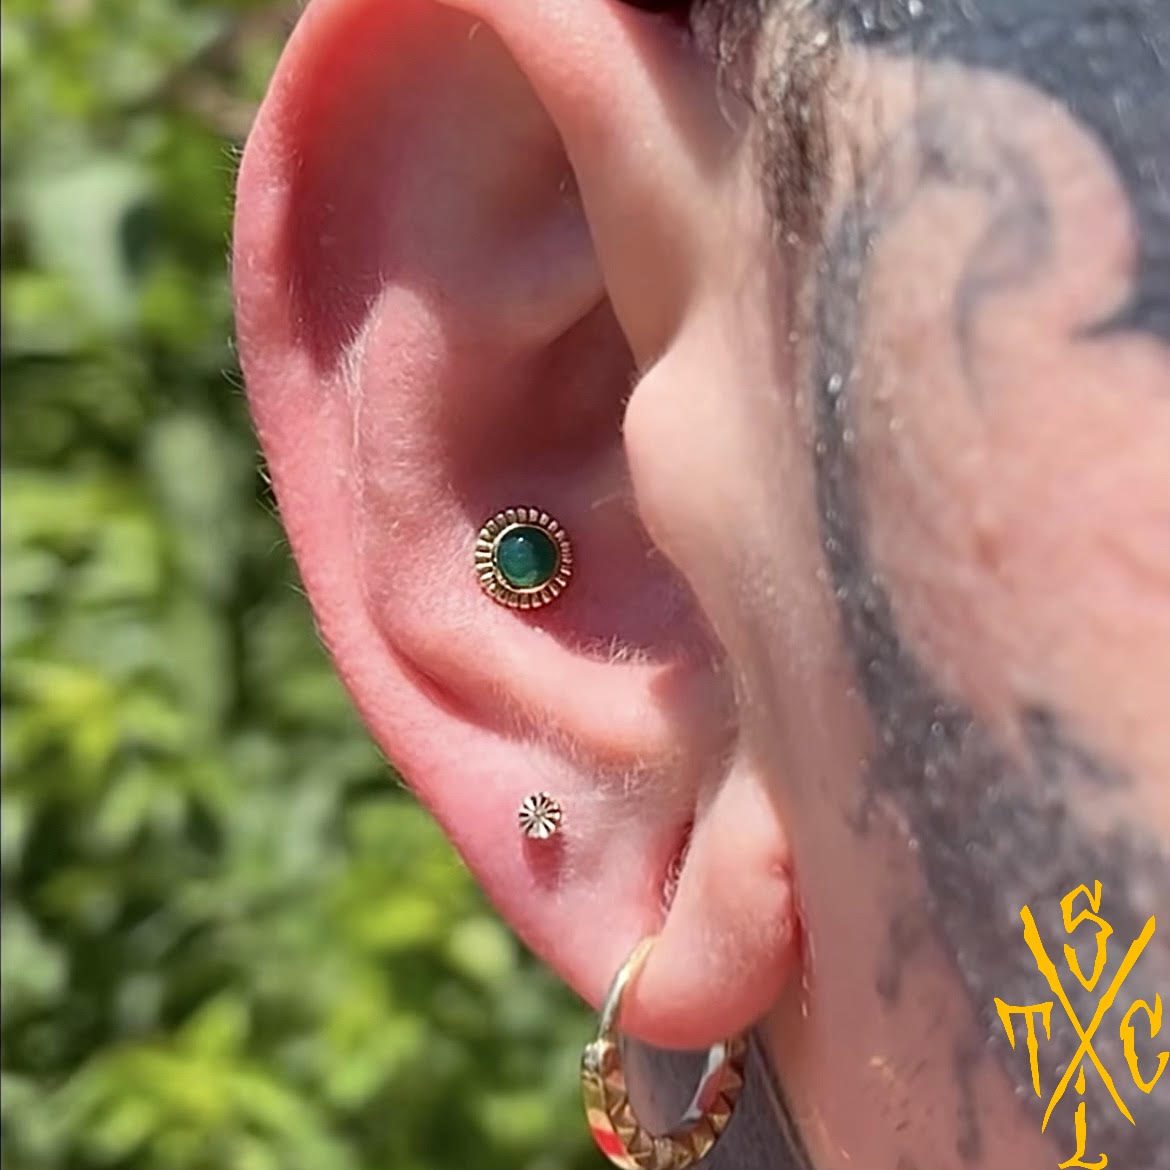 Piercing: the best place for ear piercing near me - All about tattoos